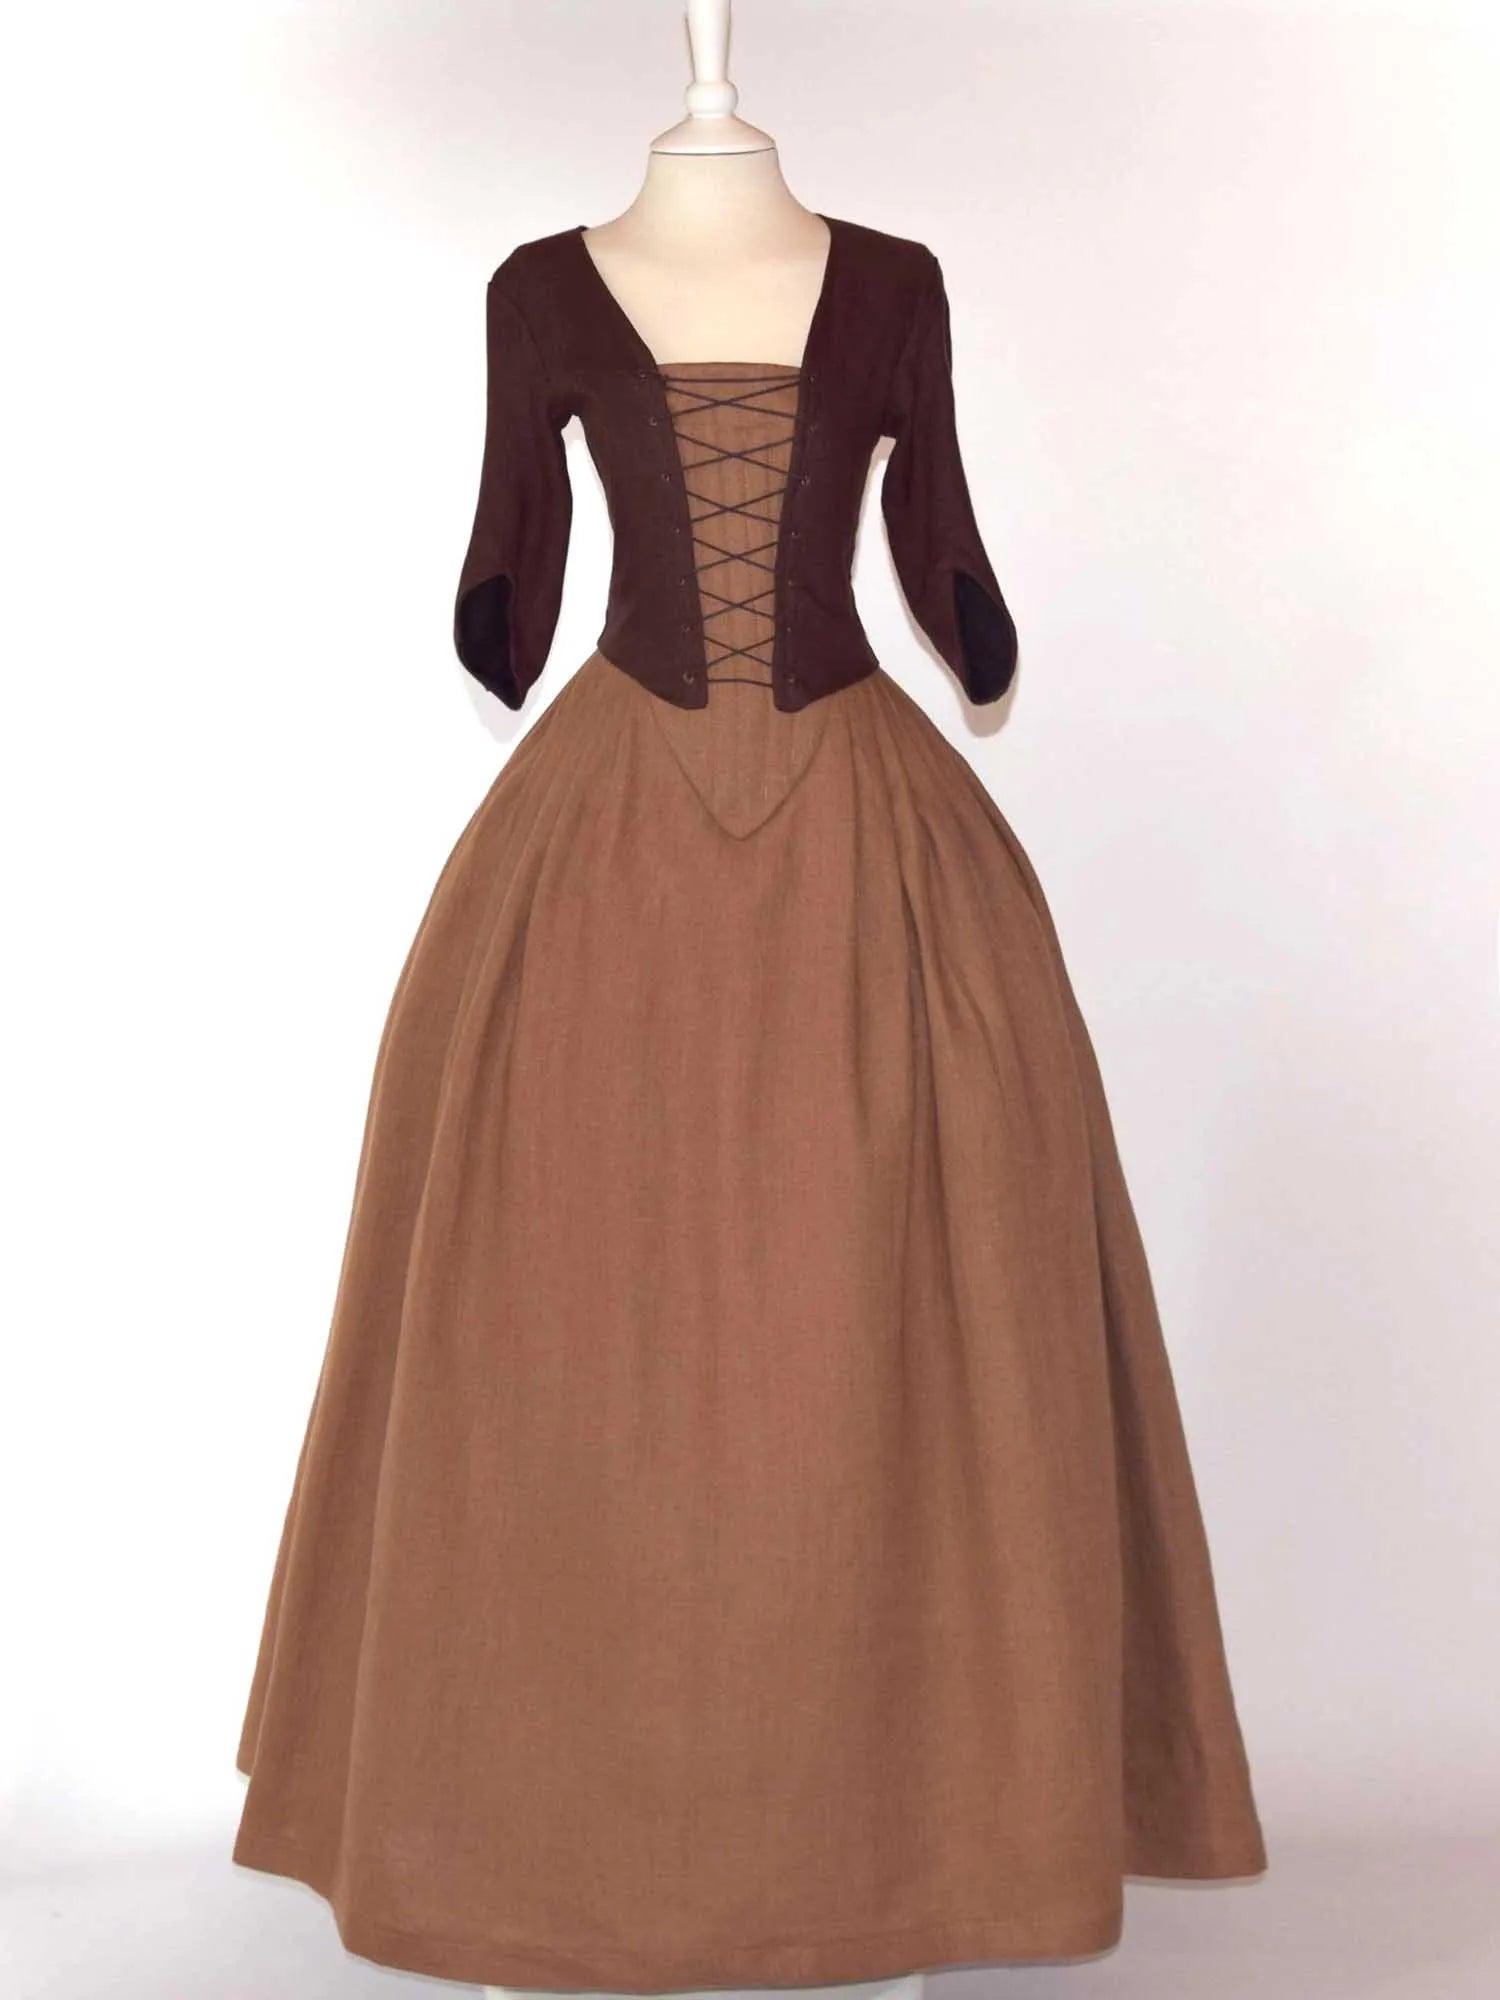 Historical Costume in Chocolate &amp; Toffee Linen - Atelier Serraspina